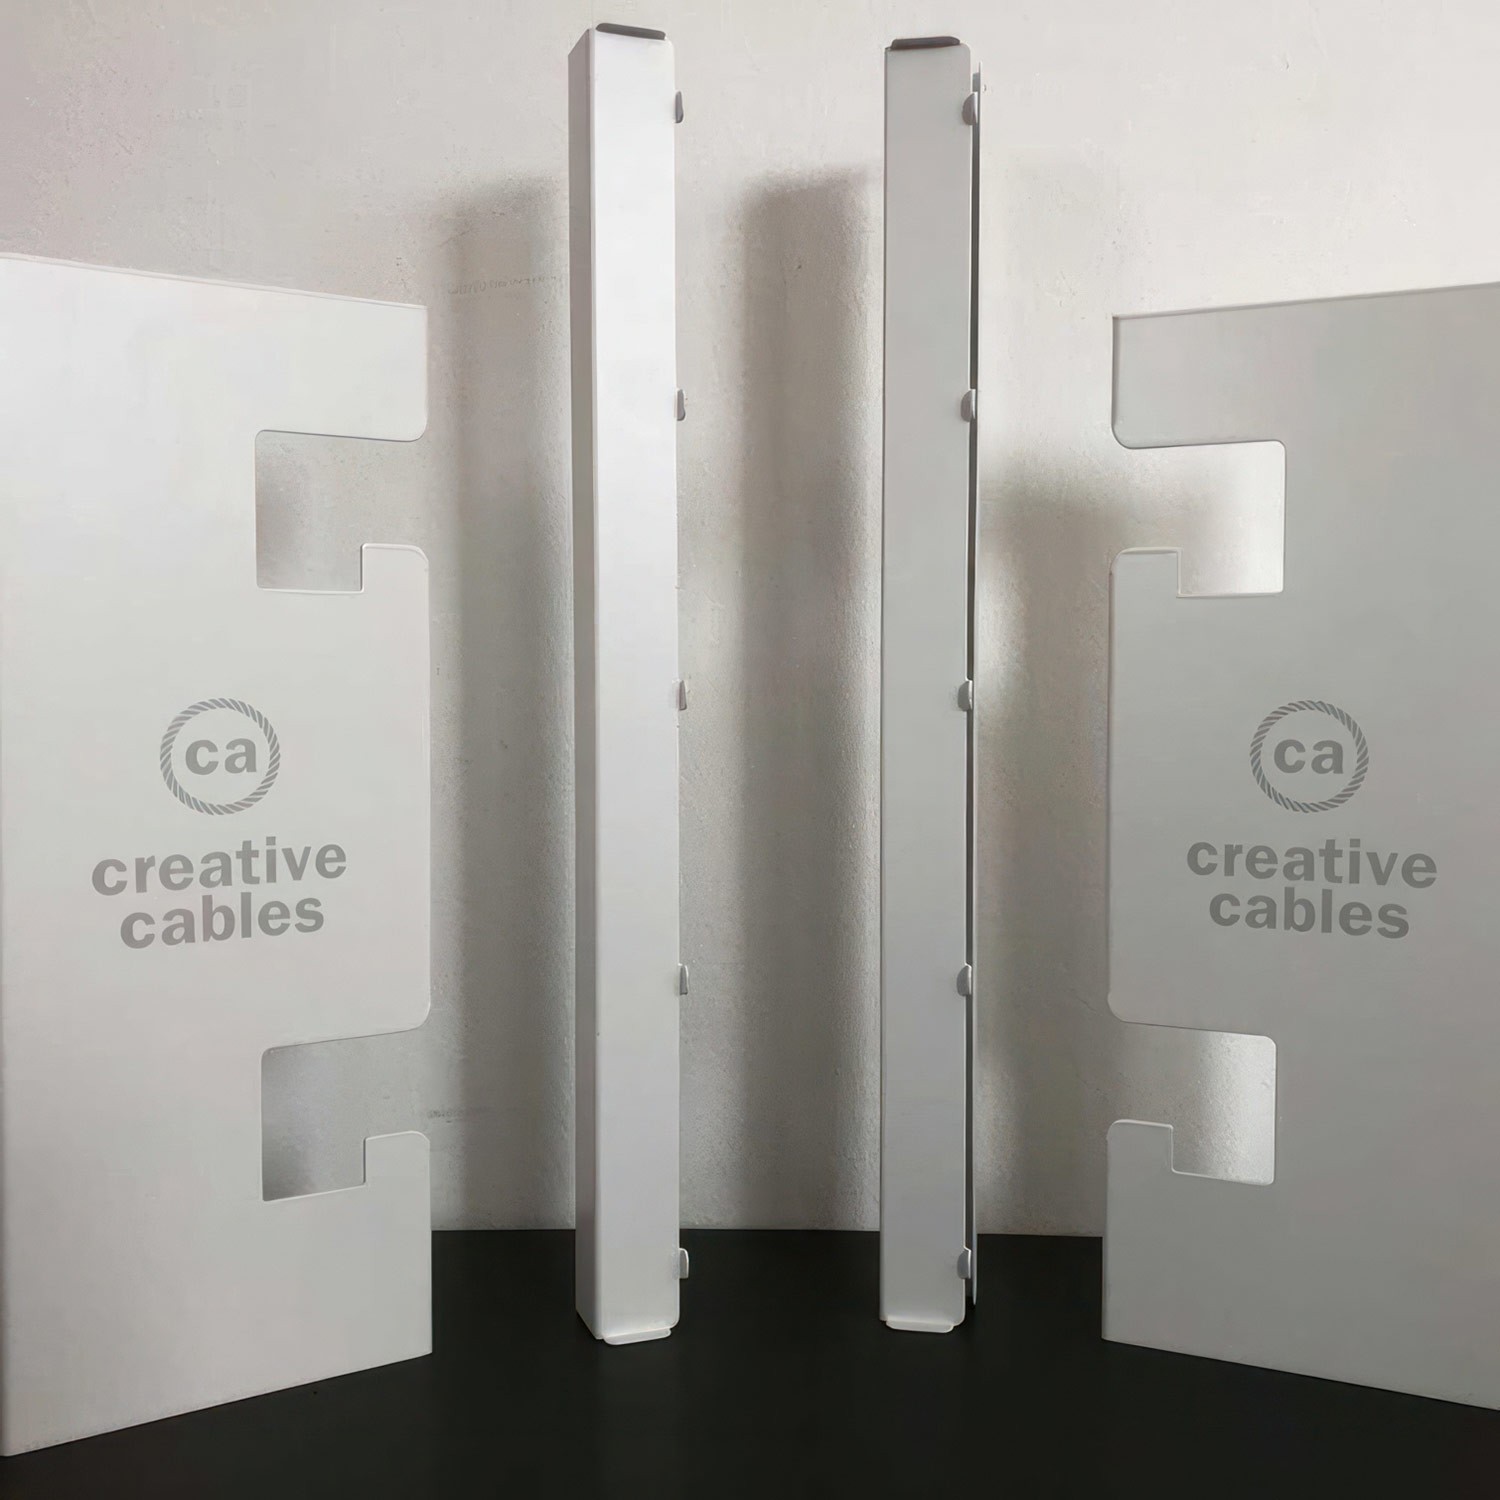 Display kit with logo for 8 reels of cable